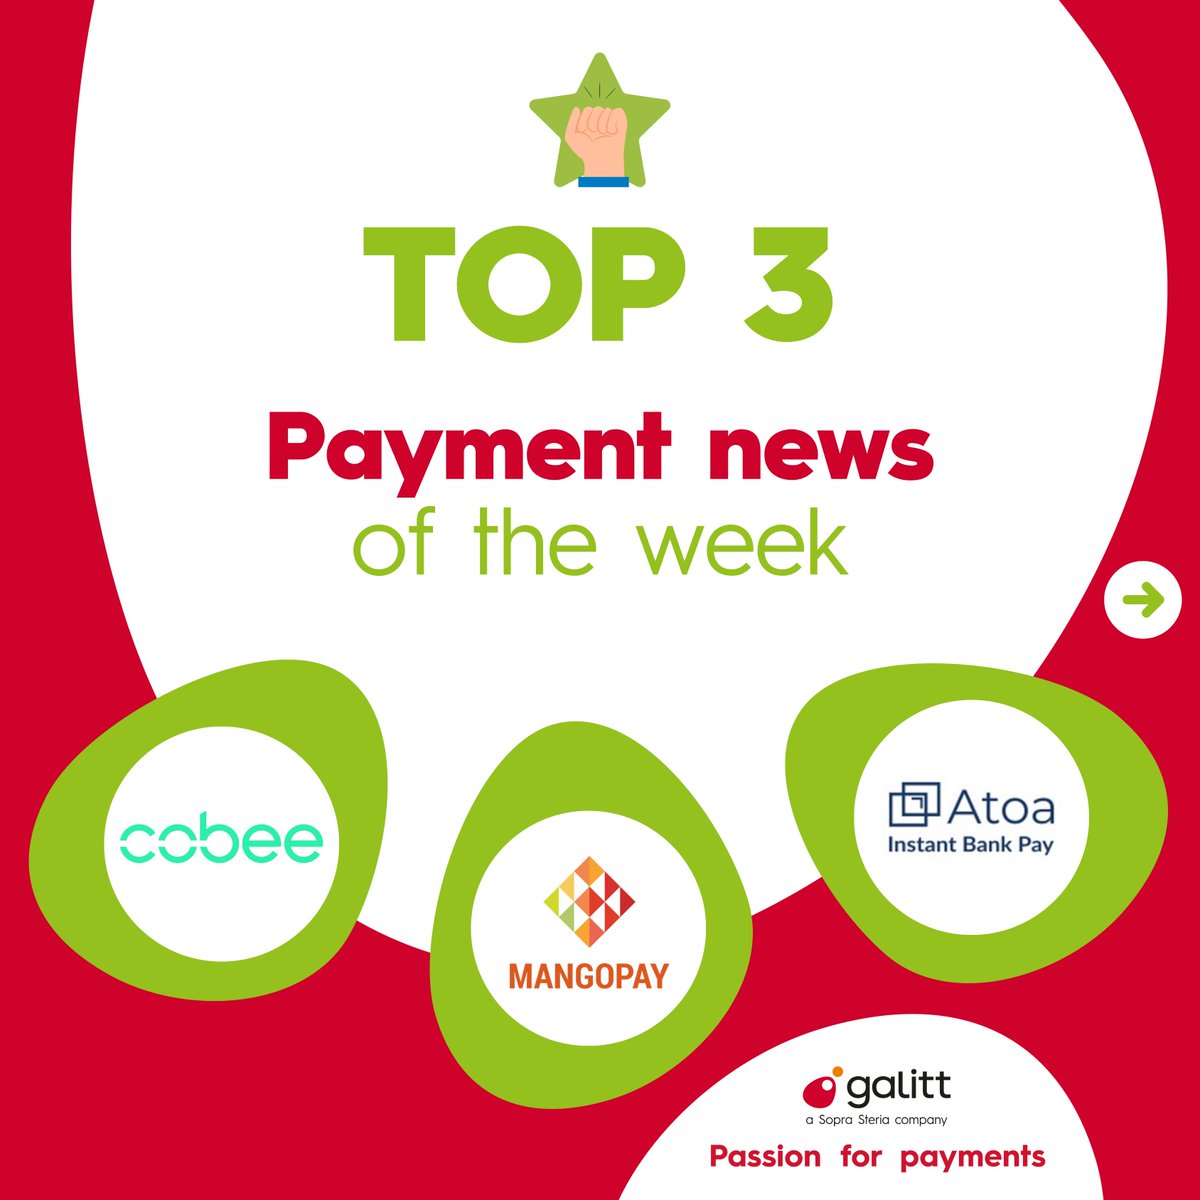 ☕Good morning Payment lovers! 🥳Spain’s @Cobee_es raises $41M for an employee benefits ‘#superapp’ 🤩Atoa, the British #A2A #payment #fintech raises $2.2M 🤝@mangopay and Nethone join forces to rid platforms of #fraud ✔️Don't miss any payment news : adnews.galitt.com